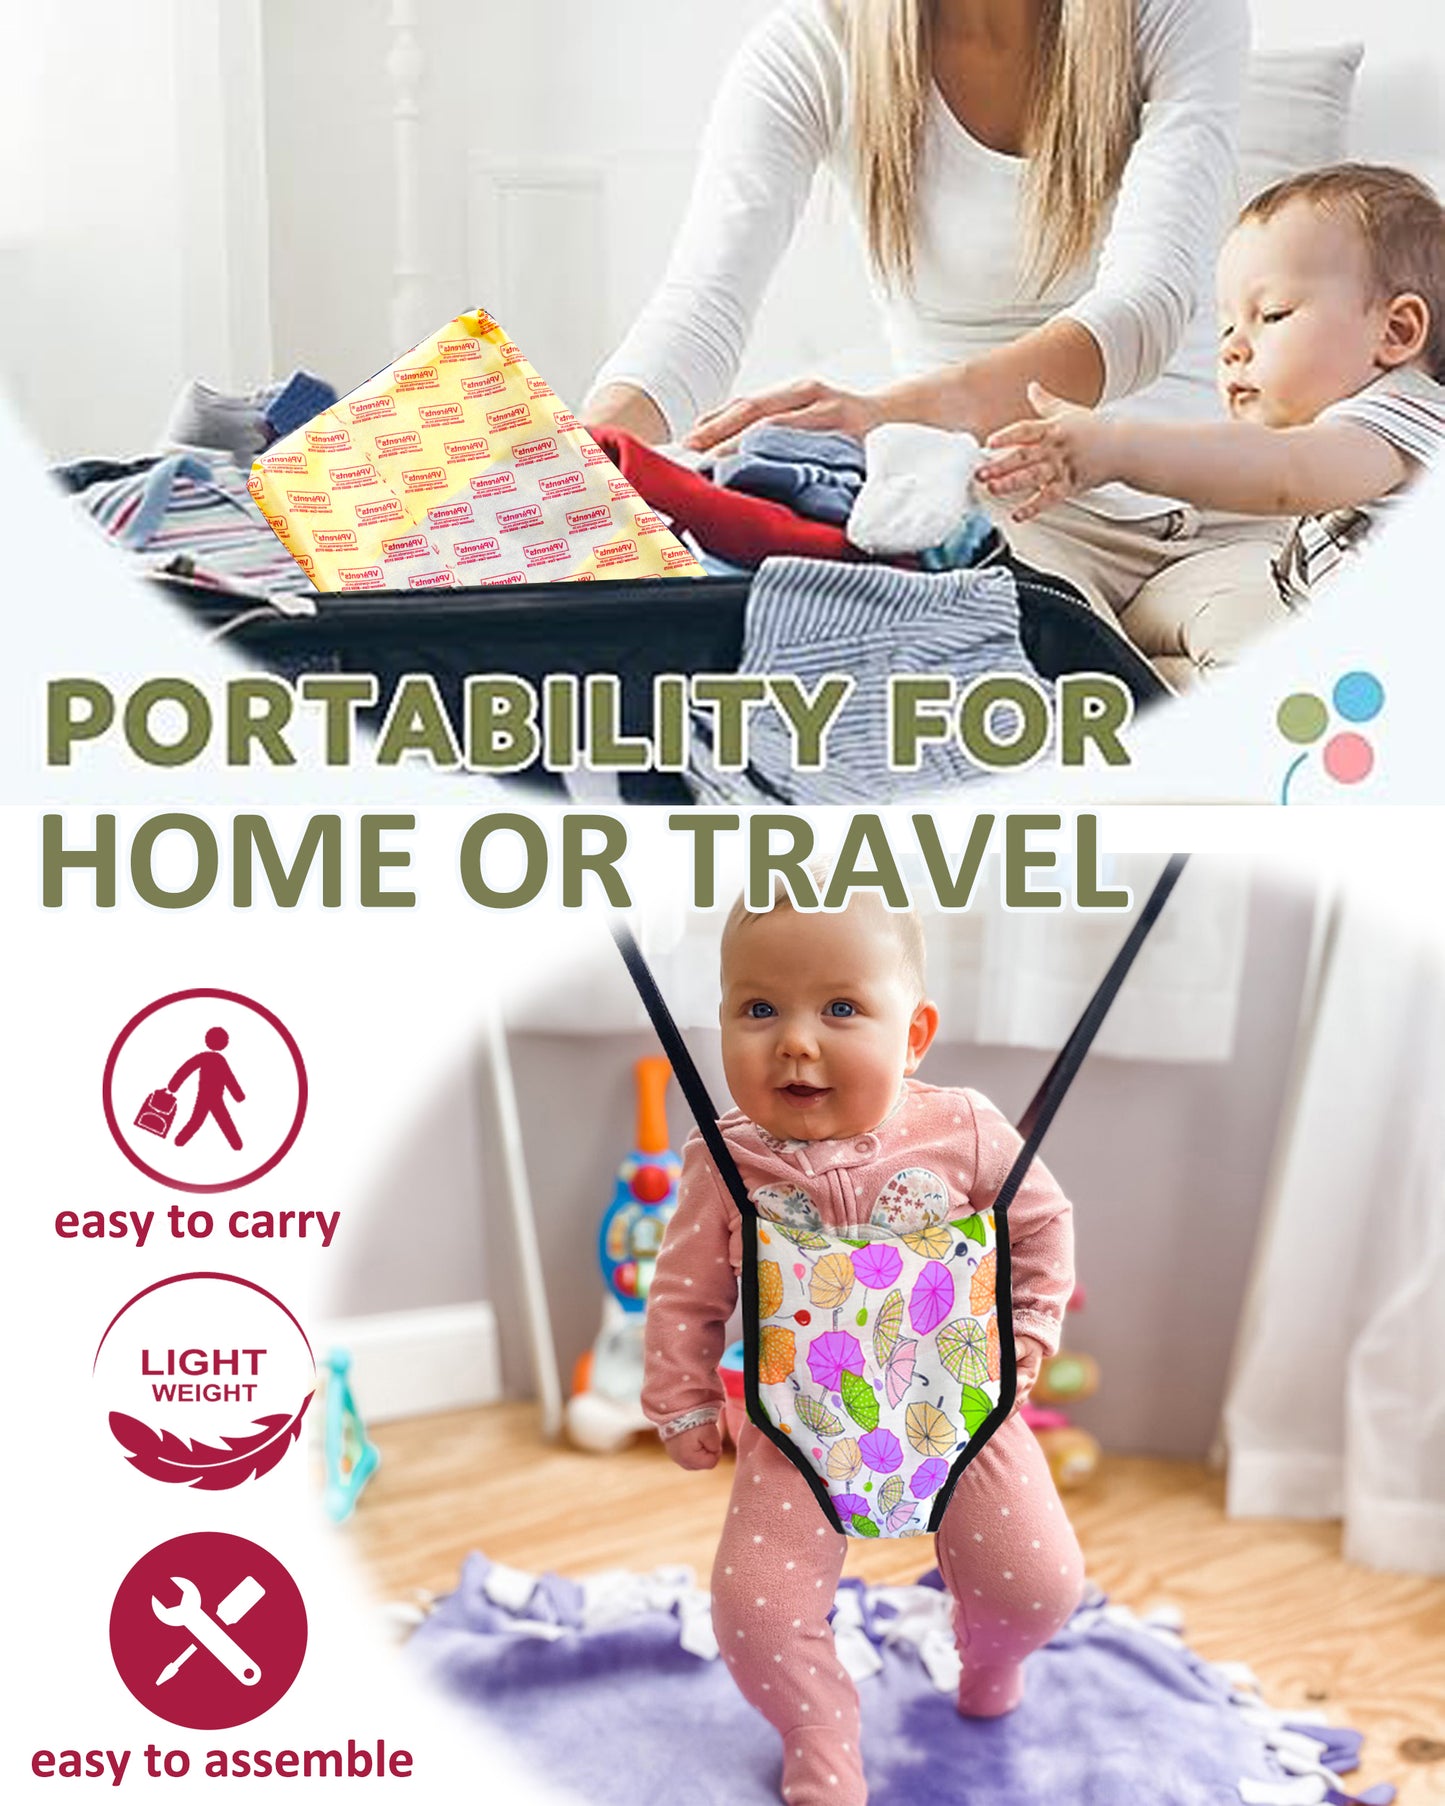 Vparents 2 in 1 Baby Toddler Jumper with Window Hanging Metal Stand Cum Baby Walking Harness Function.